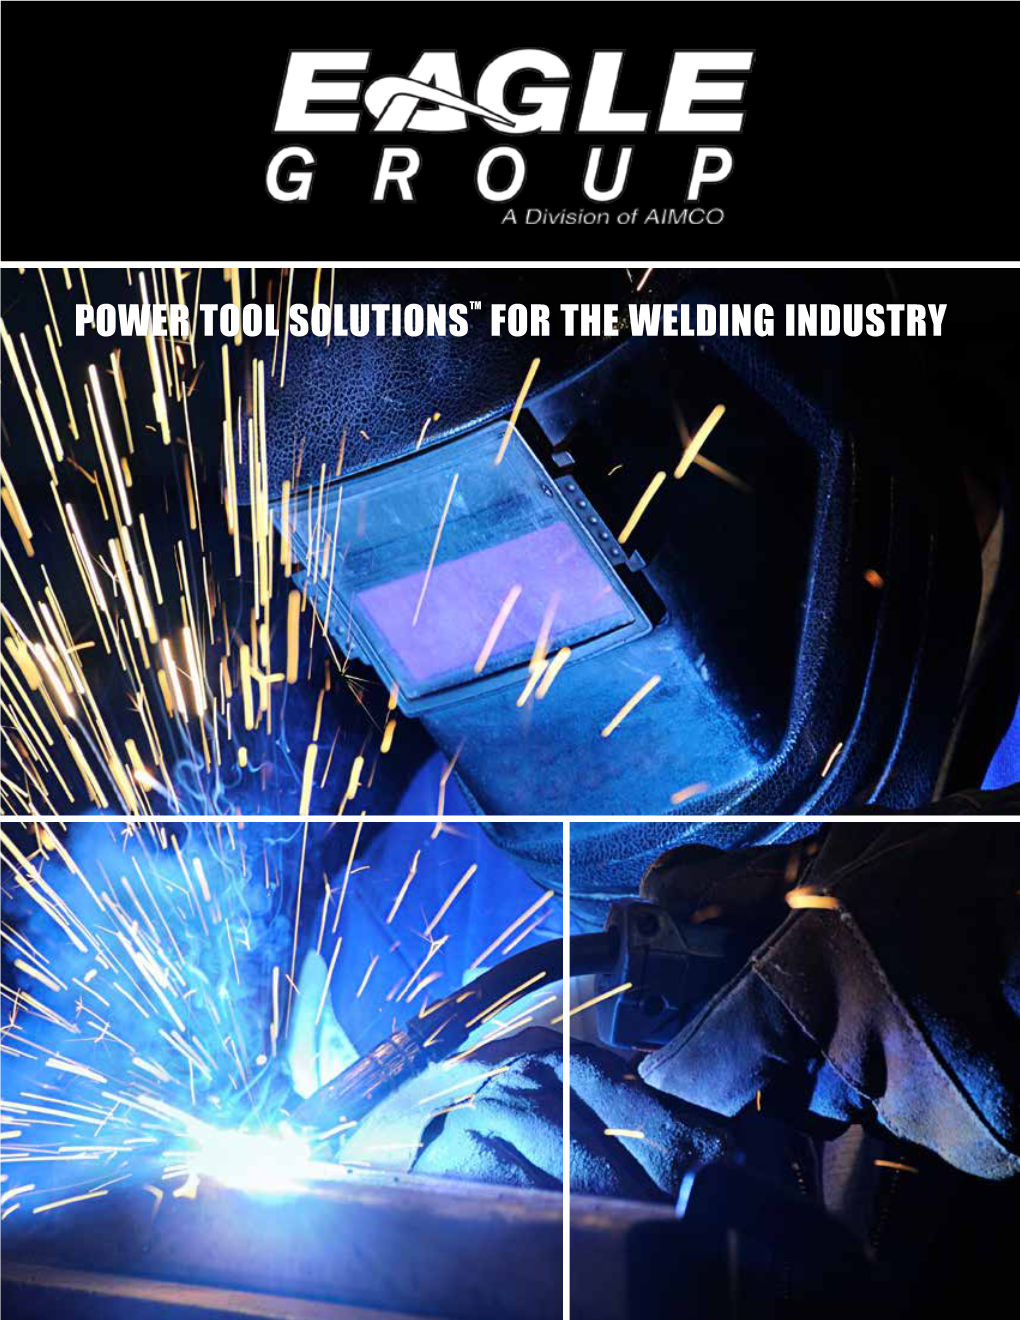 Power Tool Solutionstm for the Welding Industry